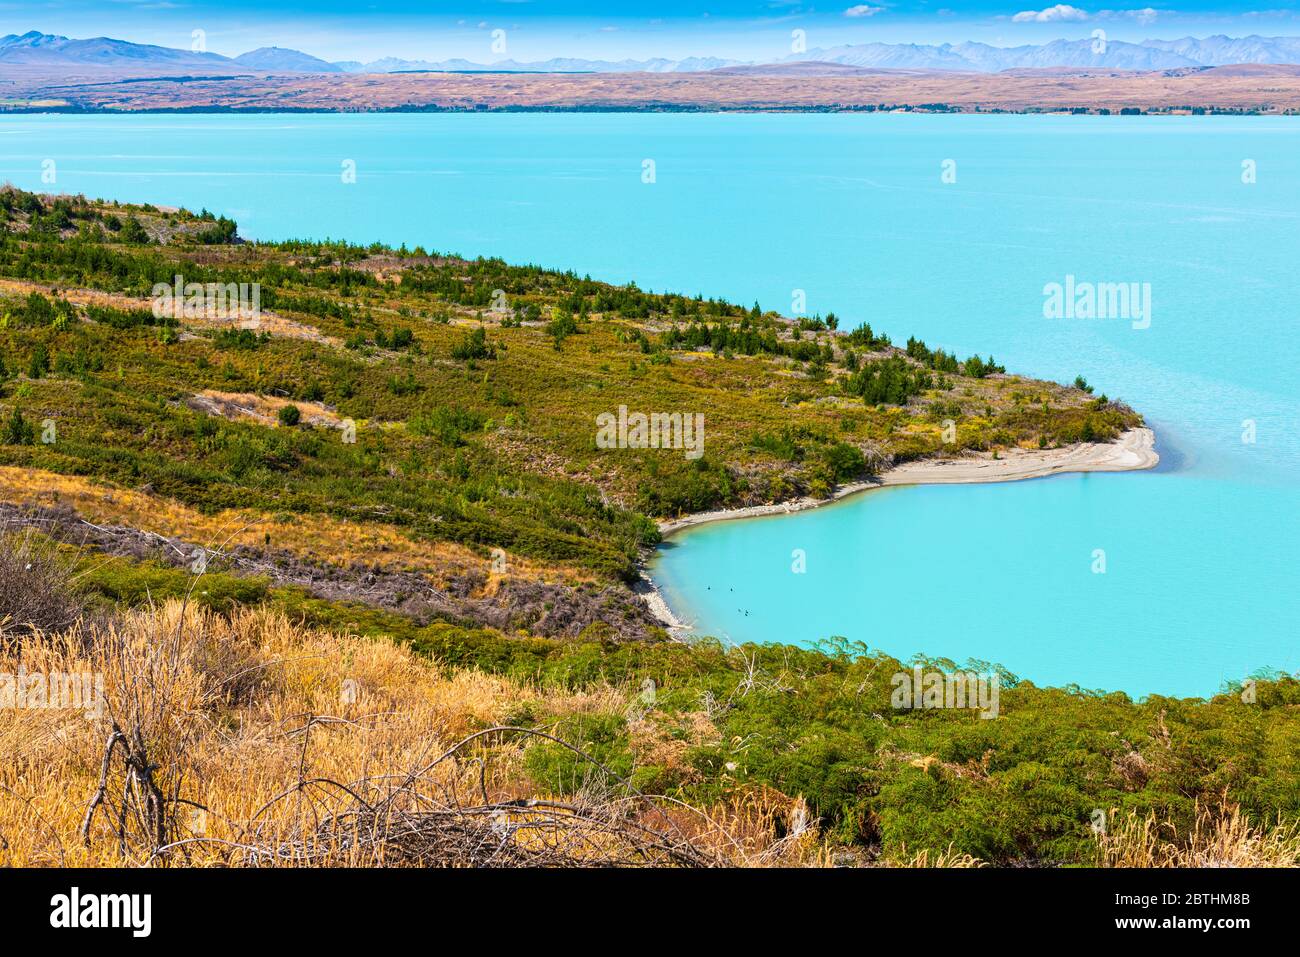 Lake Pukaki, a glacial / alpine lake on the edge of the Mount Cook National Park in the region of Canterbury, New Zealand Stock Photo